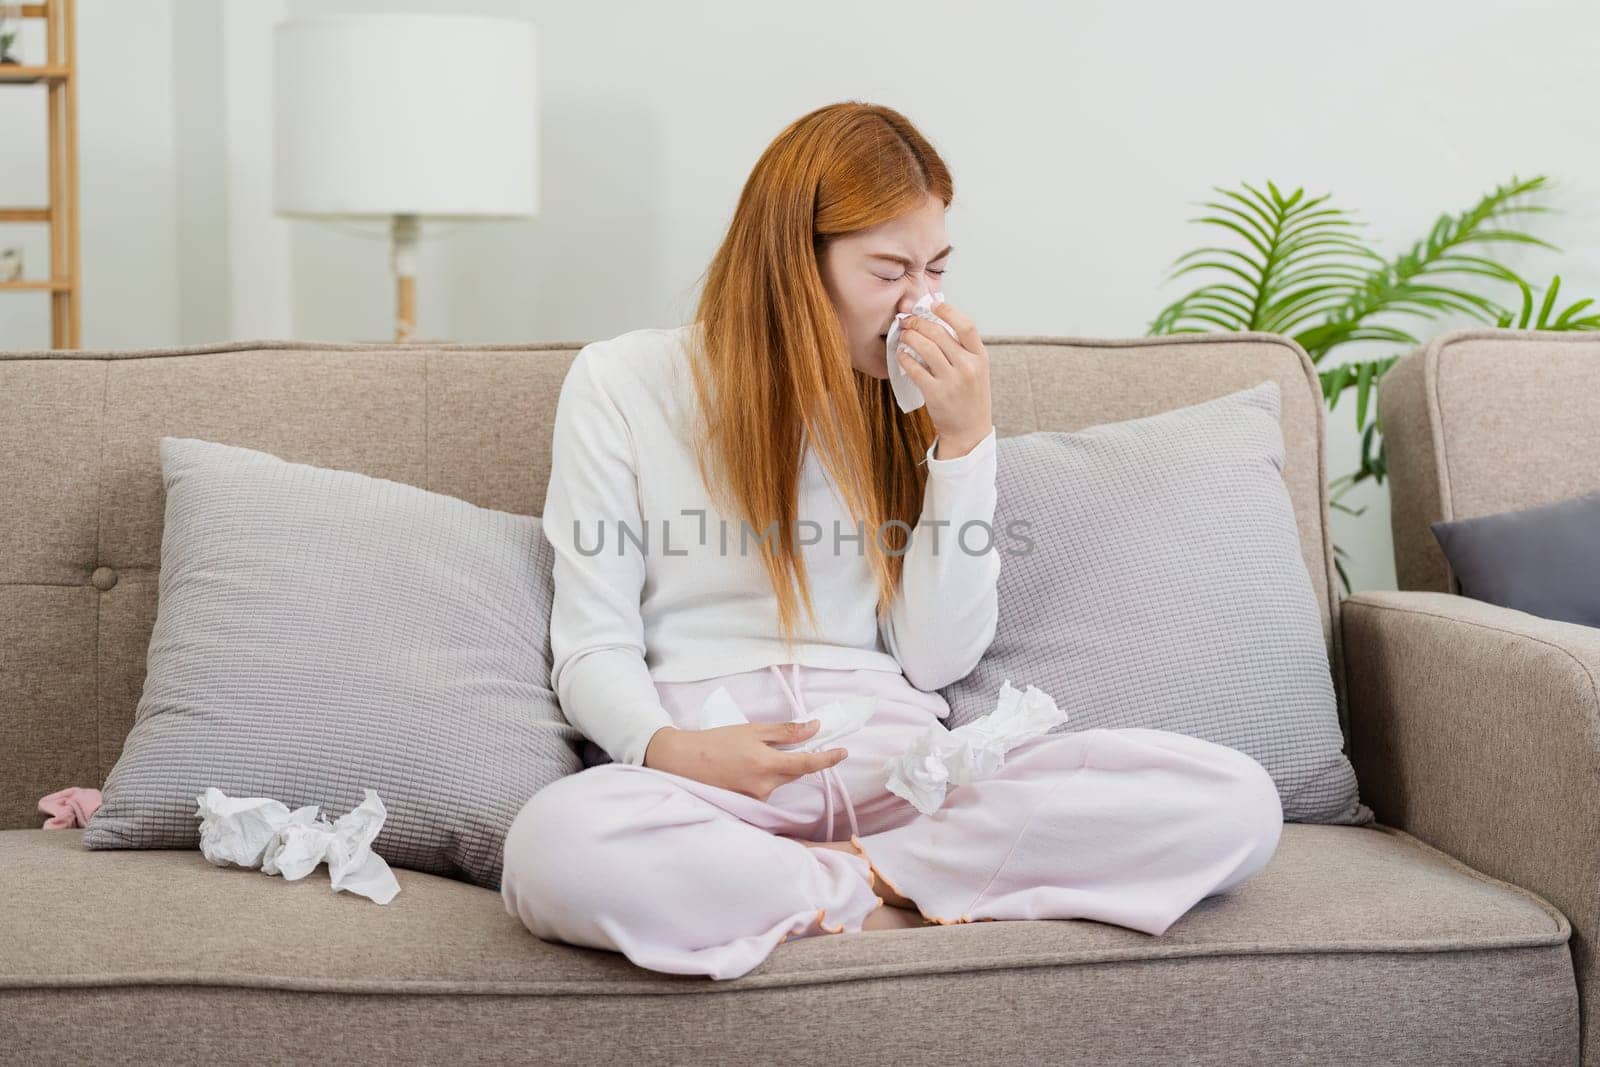 Young woman feeling sick at home, sitting on couch with tissues, blowing nose, and wearing comfortable pajamas in a modern living room.